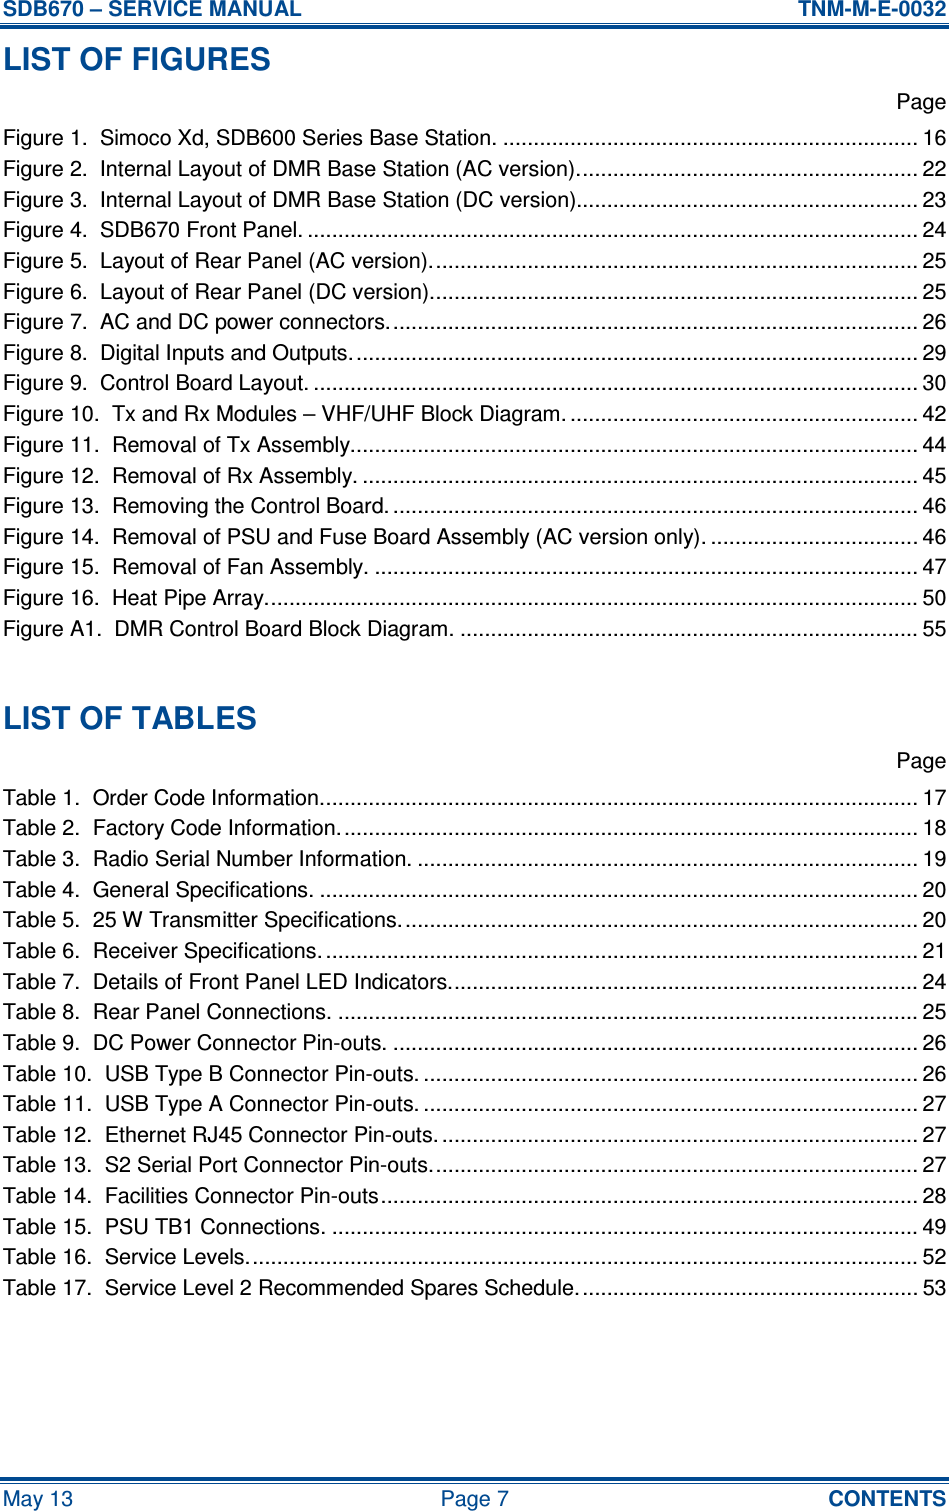 SDB670 – SERVICE MANUAL  TNM-M-E-0032 May 13  Page 7  CONTENTS LIST OF FIGURES   Page Figure 1.  Simoco Xd, SDB600 Series Base Station. .................................................................... 16 Figure 2.  Internal Layout of DMR Base Station (AC version)........................................................ 22 Figure 3.  Internal Layout of DMR Base Station (DC version)........................................................ 23 Figure 4.  SDB670 Front Panel. .................................................................................................... 24 Figure 5.  Layout of Rear Panel (AC version)................................................................................ 25 Figure 6.  Layout of Rear Panel (DC version)................................................................................ 25 Figure 7.  AC and DC power connectors....................................................................................... 26 Figure 8.  Digital Inputs and Outputs............................................................................................. 29 Figure 9.  Control Board Layout. ................................................................................................... 30 Figure 10.  Tx and Rx Modules – VHF/UHF Block Diagram. ......................................................... 42 Figure 11.  Removal of Tx Assembly............................................................................................. 44 Figure 12.  Removal of Rx Assembly. ........................................................................................... 45 Figure 13.  Removing the Control Board. ...................................................................................... 46 Figure 14.  Removal of PSU and Fuse Board Assembly (AC version only). .................................. 46 Figure 15.  Removal of Fan Assembly. ......................................................................................... 47 Figure 16.  Heat Pipe Array........................................................................................................... 50 Figure A1.  DMR Control Board Block Diagram. ........................................................................... 55  LIST OF TABLES   Page Table 1.  Order Code Information.................................................................................................. 17 Table 2.  Factory Code Information. .............................................................................................. 18 Table 3.  Radio Serial Number Information. .................................................................................. 19 Table 4.  General Specifications. .................................................................................................. 20 Table 5.  25 W Transmitter Specifications..................................................................................... 20 Table 6.  Receiver Specifications.................................................................................................. 21 Table 7.  Details of Front Panel LED Indicators............................................................................. 24 Table 8.  Rear Panel Connections. ............................................................................................... 25 Table 9.  DC Power Connector Pin-outs. ...................................................................................... 26 Table 10.  USB Type B Connector Pin-outs. ................................................................................. 26 Table 11.  USB Type A Connector Pin-outs. ................................................................................. 27 Table 12.  Ethernet RJ45 Connector Pin-outs. .............................................................................. 27 Table 13.  S2 Serial Port Connector Pin-outs................................................................................ 27 Table 14.  Facilities Connector Pin-outs........................................................................................ 28 Table 15.  PSU TB1 Connections. ................................................................................................ 49 Table 16.  Service Levels.............................................................................................................. 52 Table 17.  Service Level 2 Recommended Spares Schedule........................................................ 53   